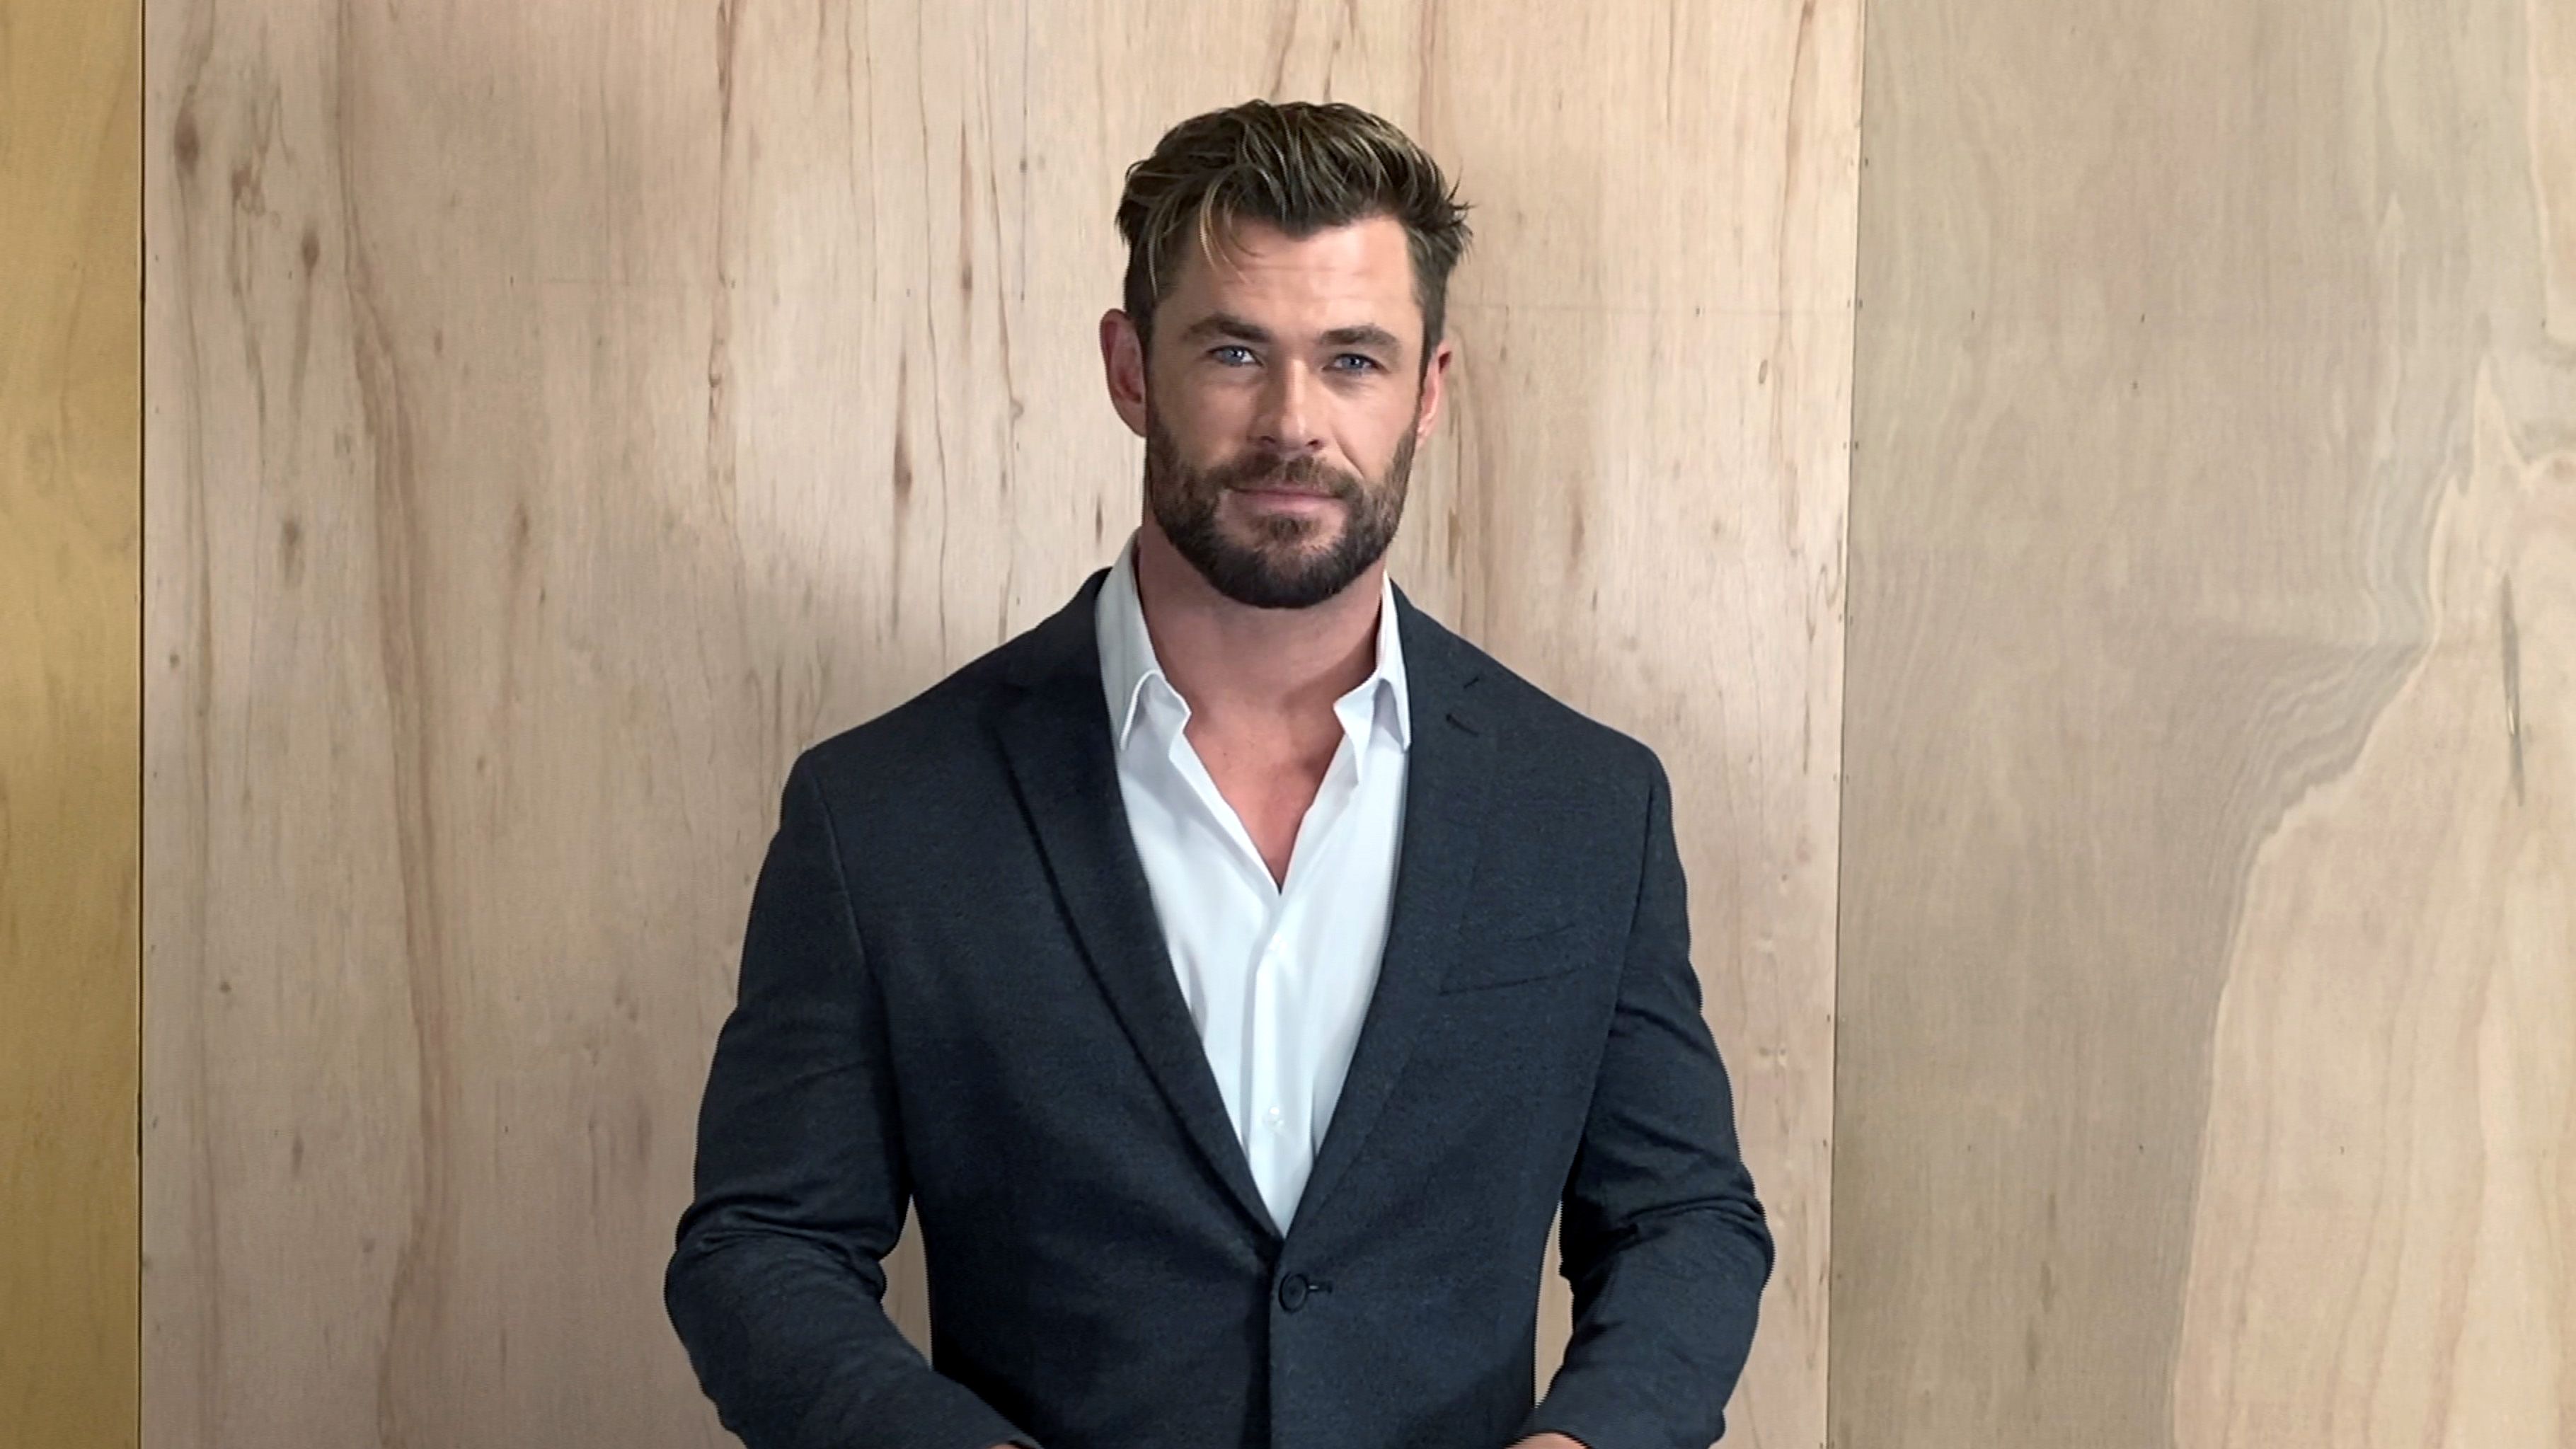 https://hips.hearstapps.com/hmg-prod/images/in-this-screengrab-chris-hemsworth-speaks-at-the-26th-news-photo-1711048221.jpg?crop=1xw:0.97315xh;center,top